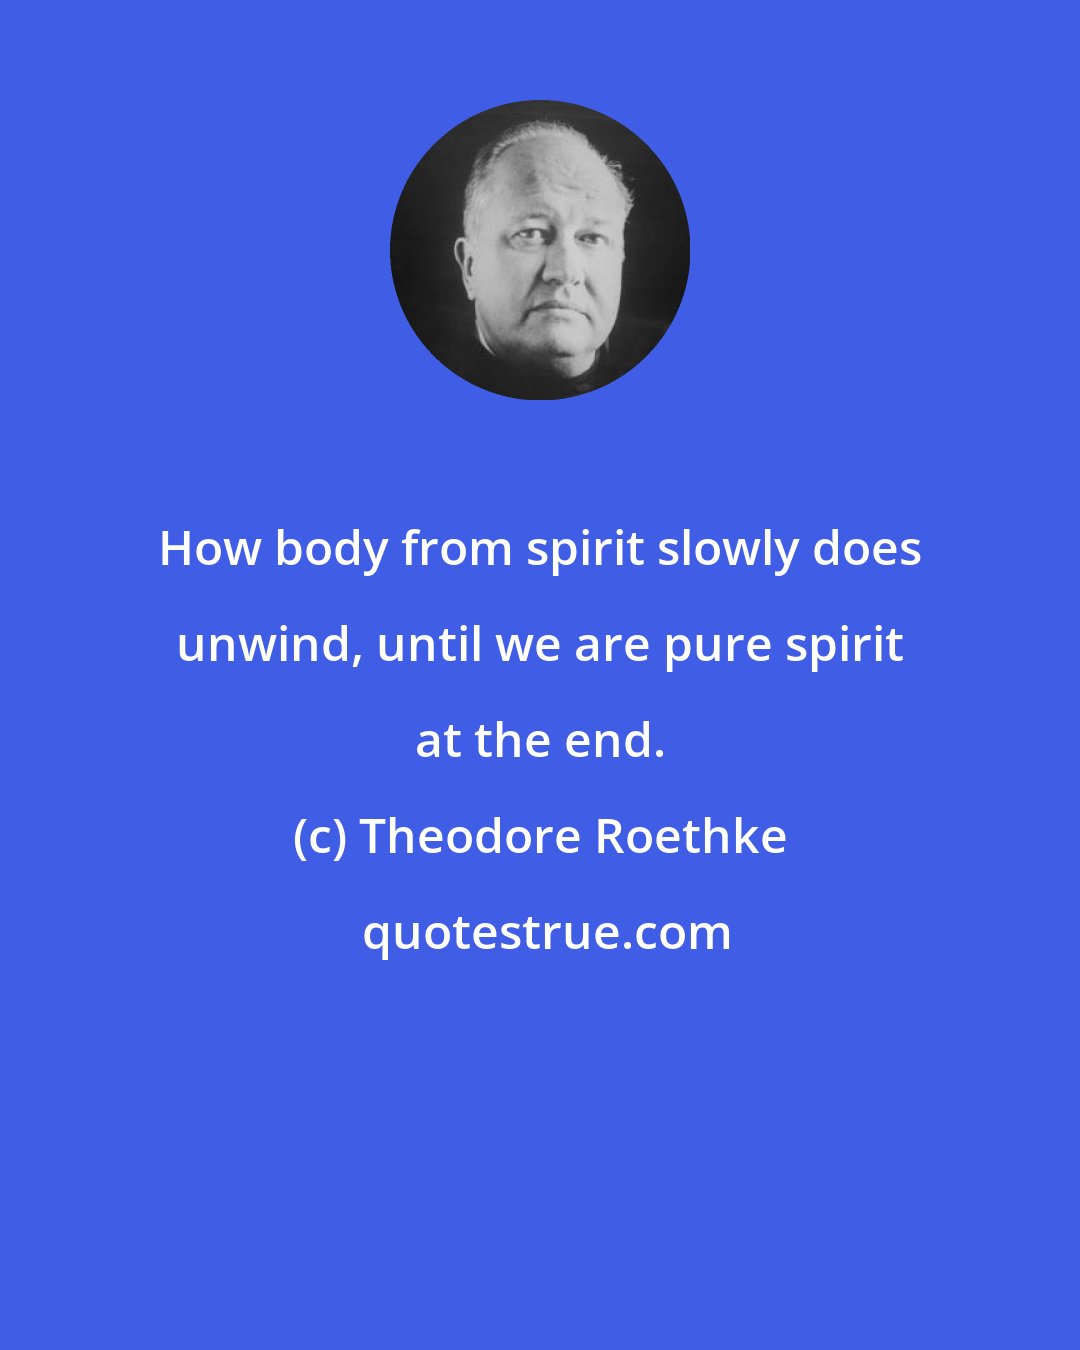 Theodore Roethke: How body from spirit slowly does unwind, until we are pure spirit at the end.